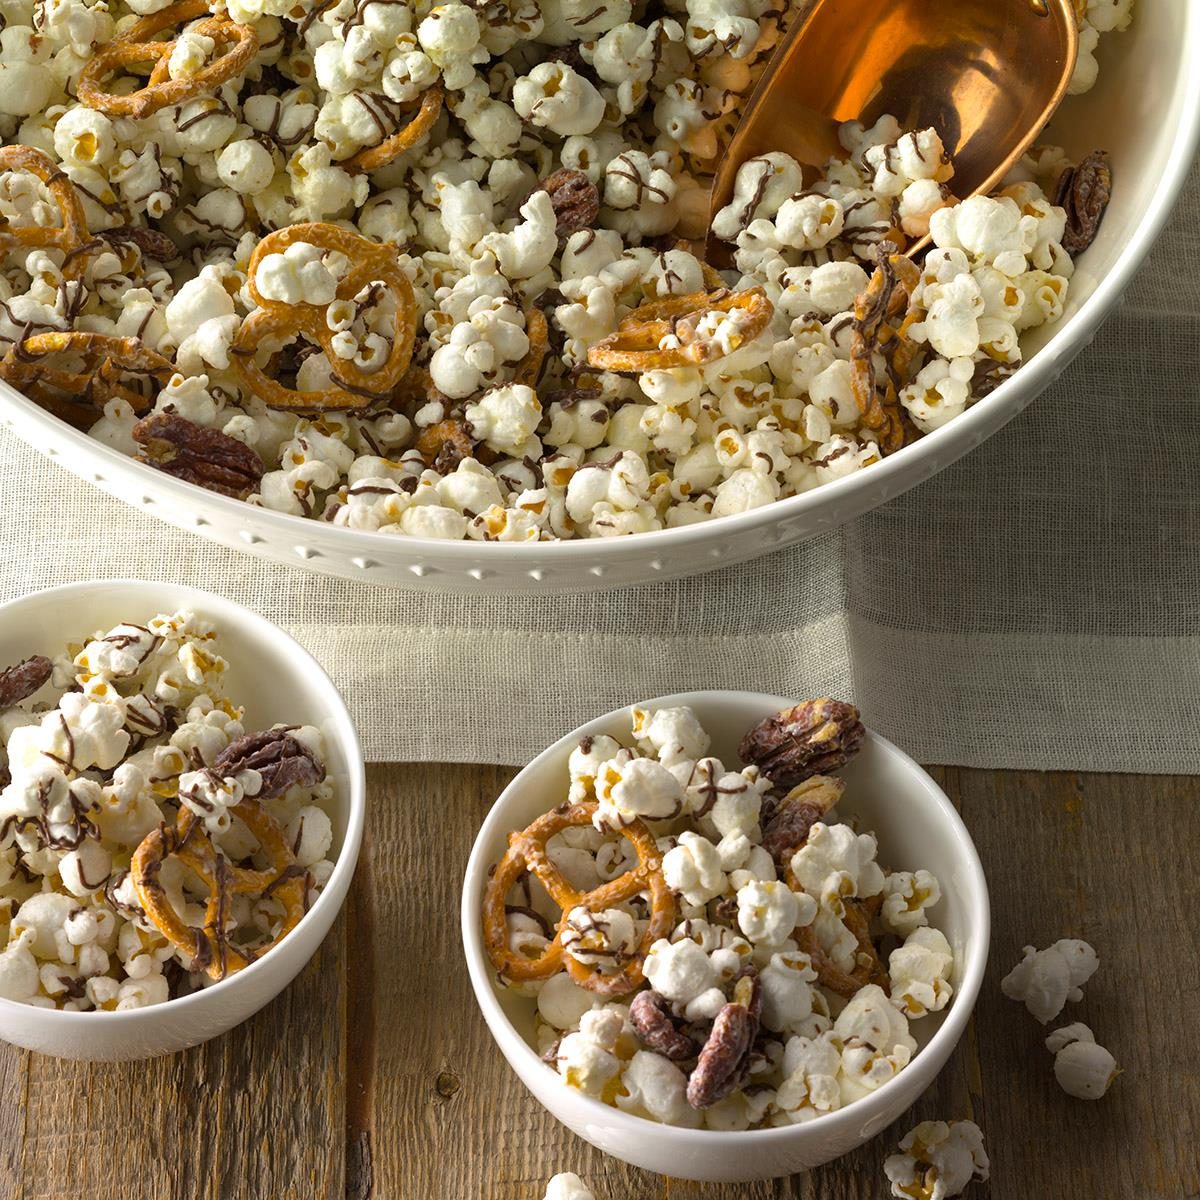 <p>For a bake sale last year, I wanted to try something different. I’d seen chocolate popcorn in a candy shop and thought I’d try making it. This recipe was a great success. —Mary Schmittinger, Colgate, Wisconsin</p> <div class="listicle-page__buttons"> <div class="listicle-page__cta-button"><a href='https://www.tasteofhome.com/recipes/striped-chocolate-popcorn/'>Go to Recipe</a></div> </div>